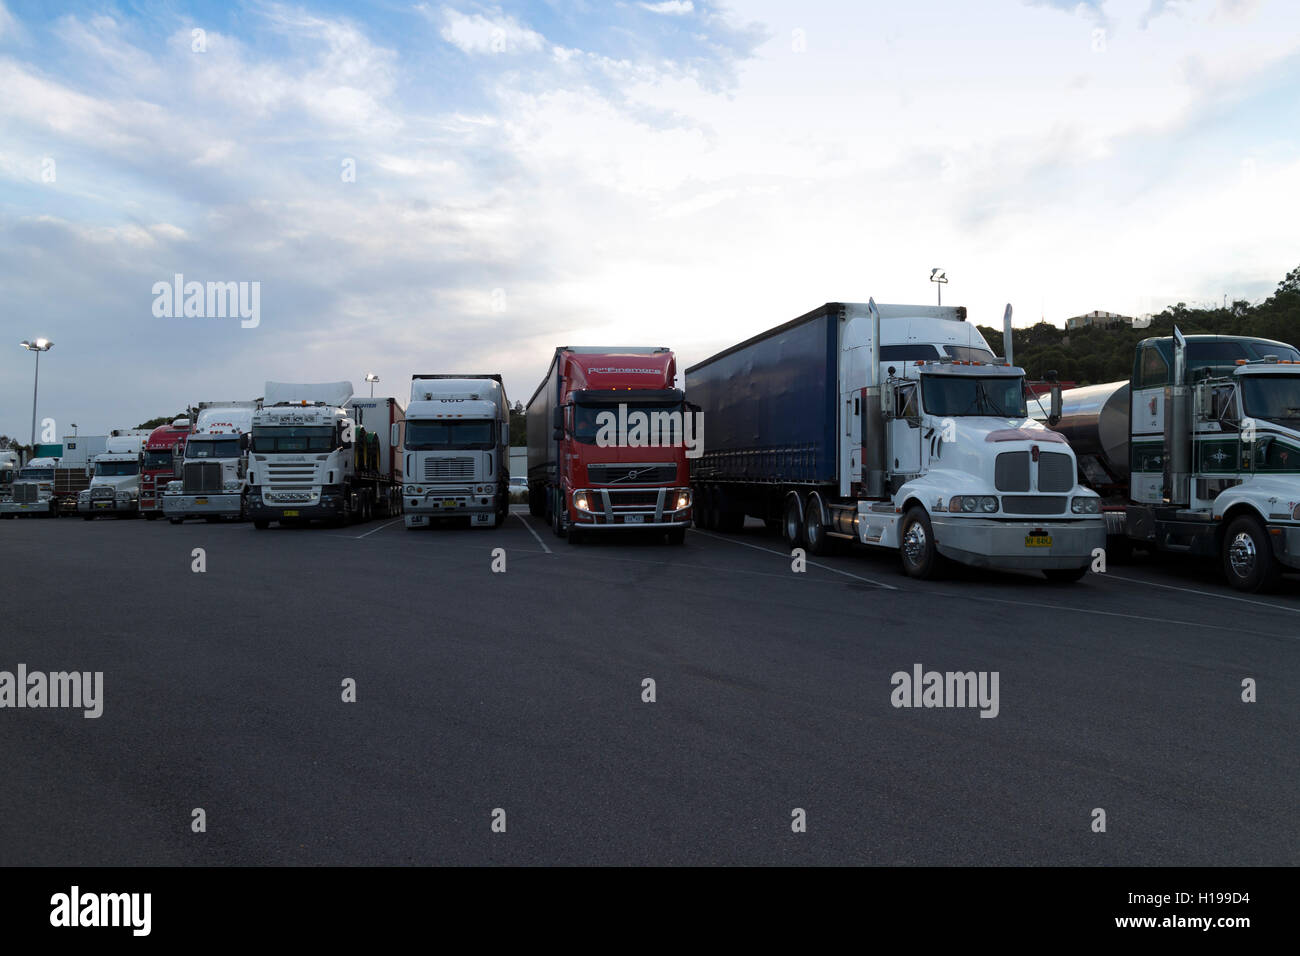 Interstate long-distance trucks at service station parking lot Hume Highway Victoria Australia Stock Photo